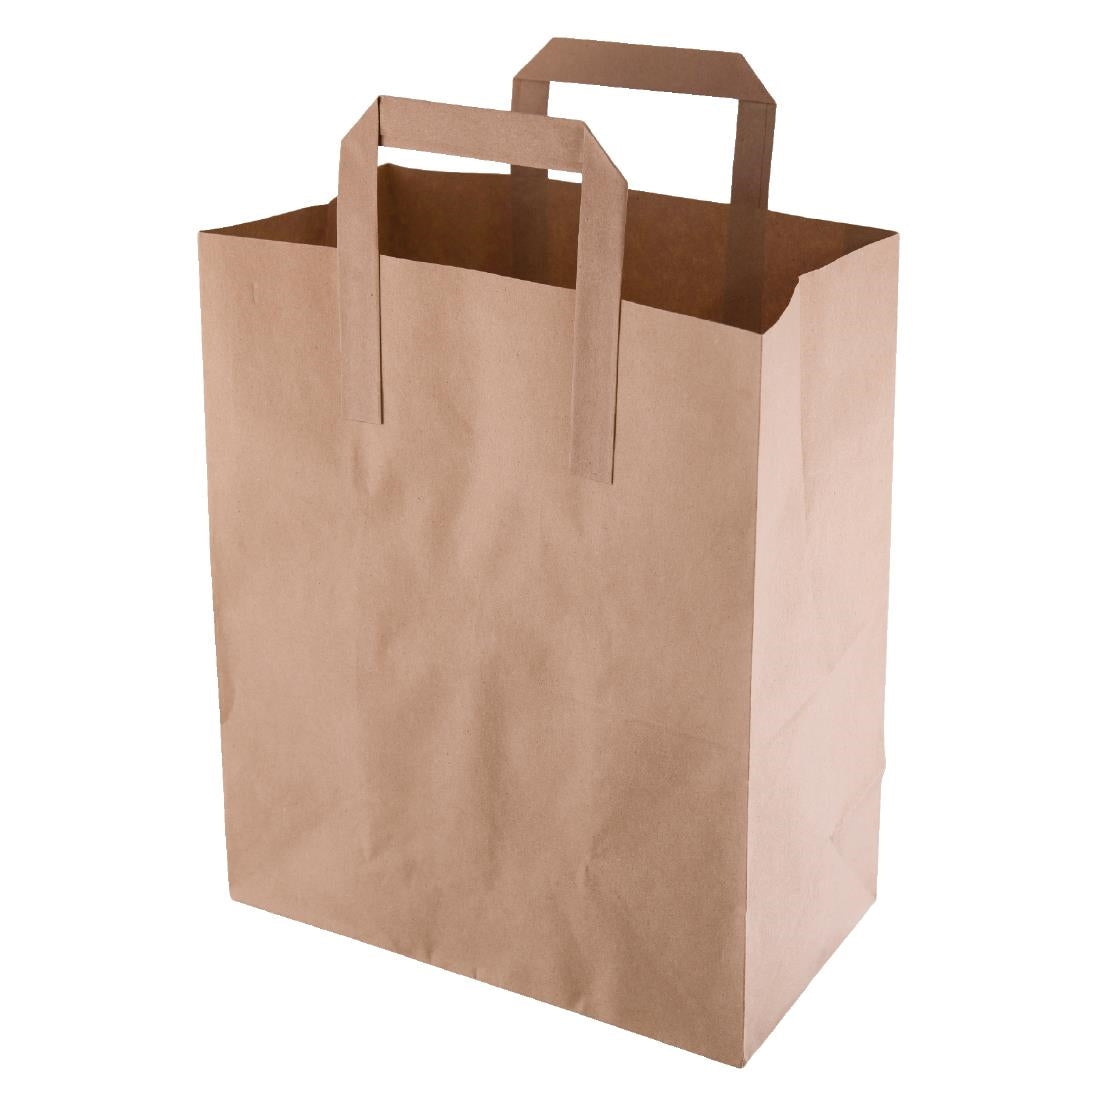 Recycled Brown Paper Carrier Bags Medium (Pack of 250)